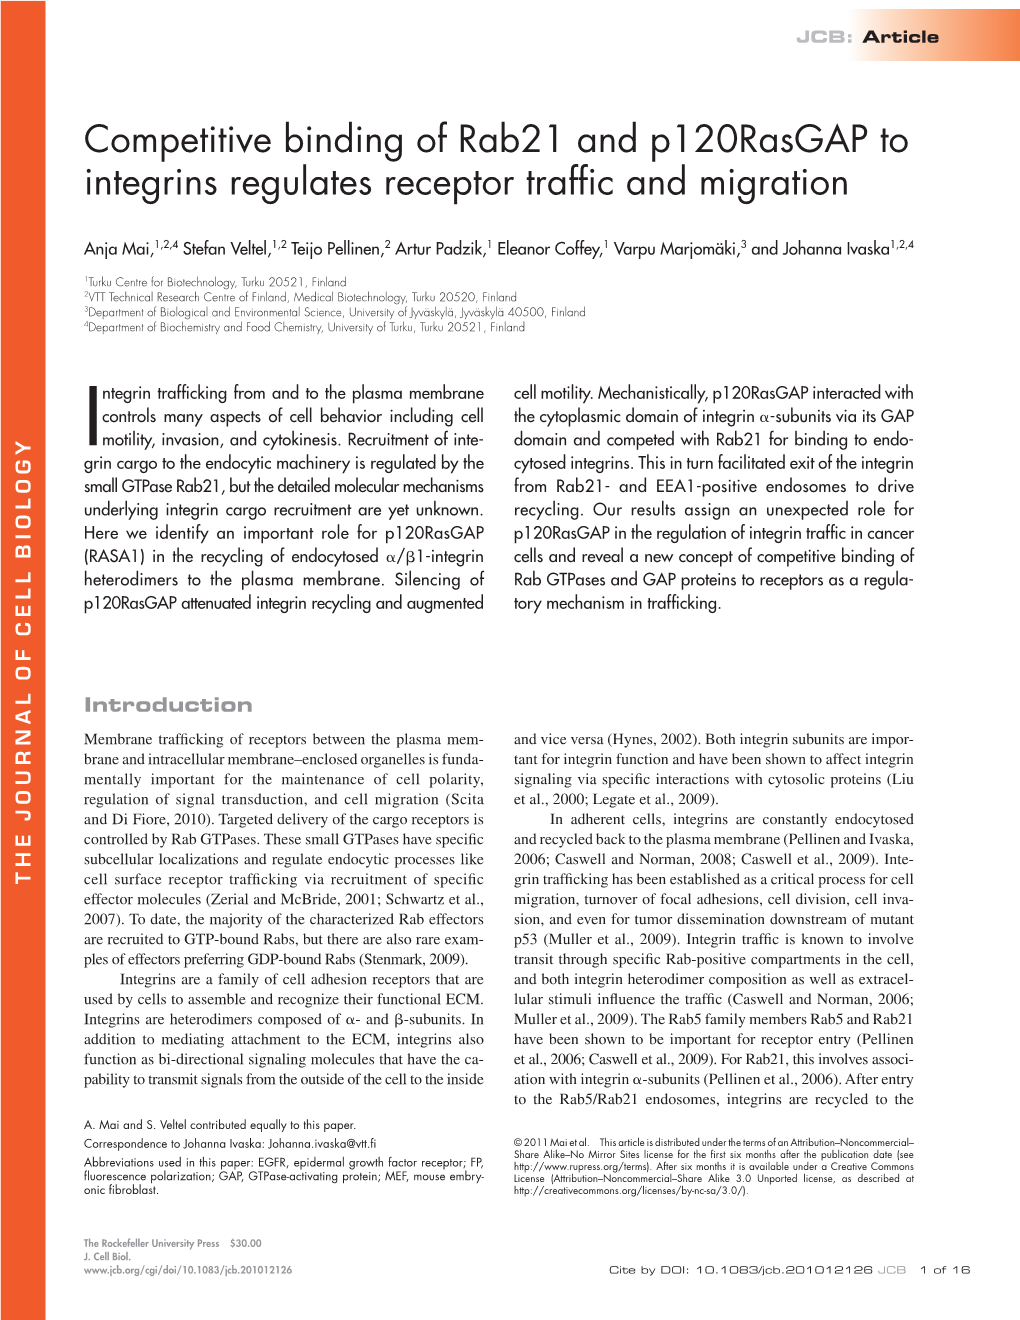 Competitive Binding of Rab21 and P120rasgap to Integrins Regulates Receptor Traffic and Migration